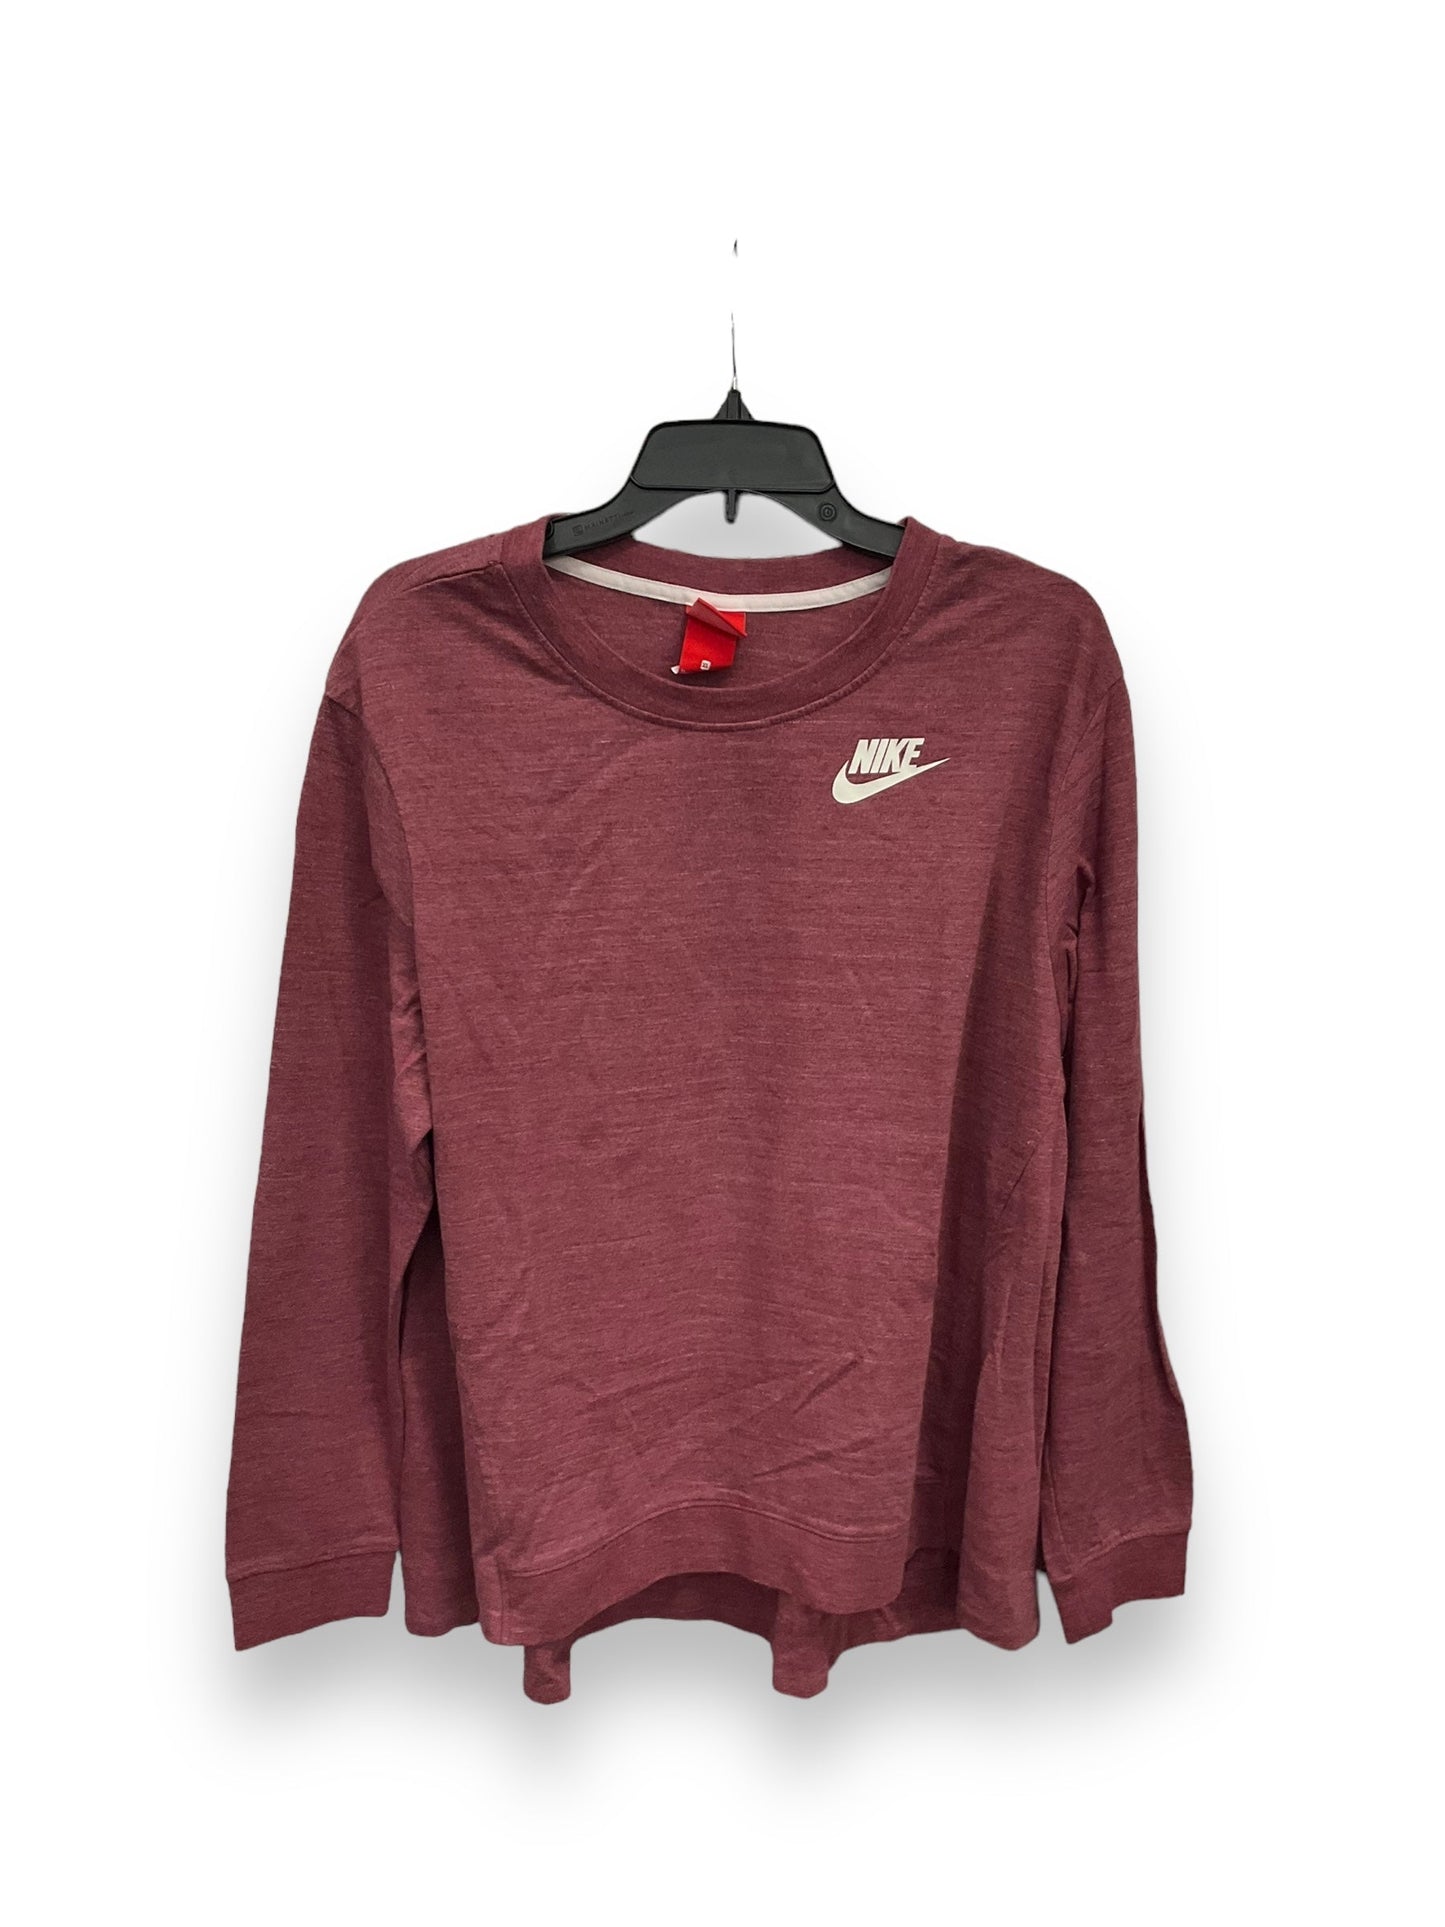 Red Top Long Sleeve Nike Apparel, Size Xl